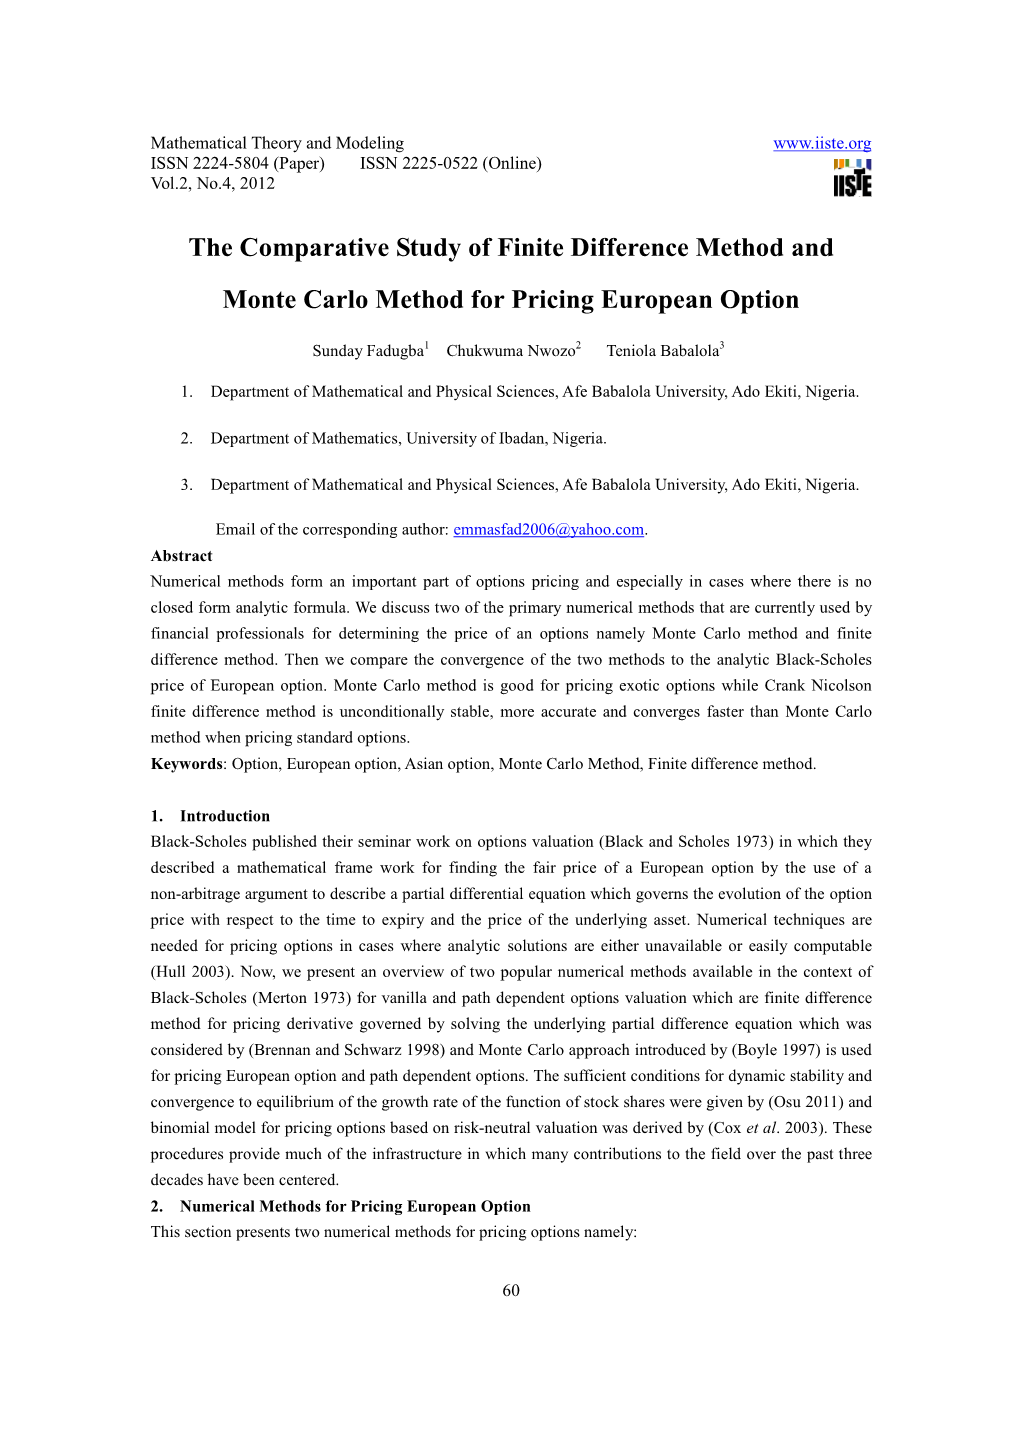 The Comparative Study of Finite Difference Method and Monte Carlo Method for Pricing European Option